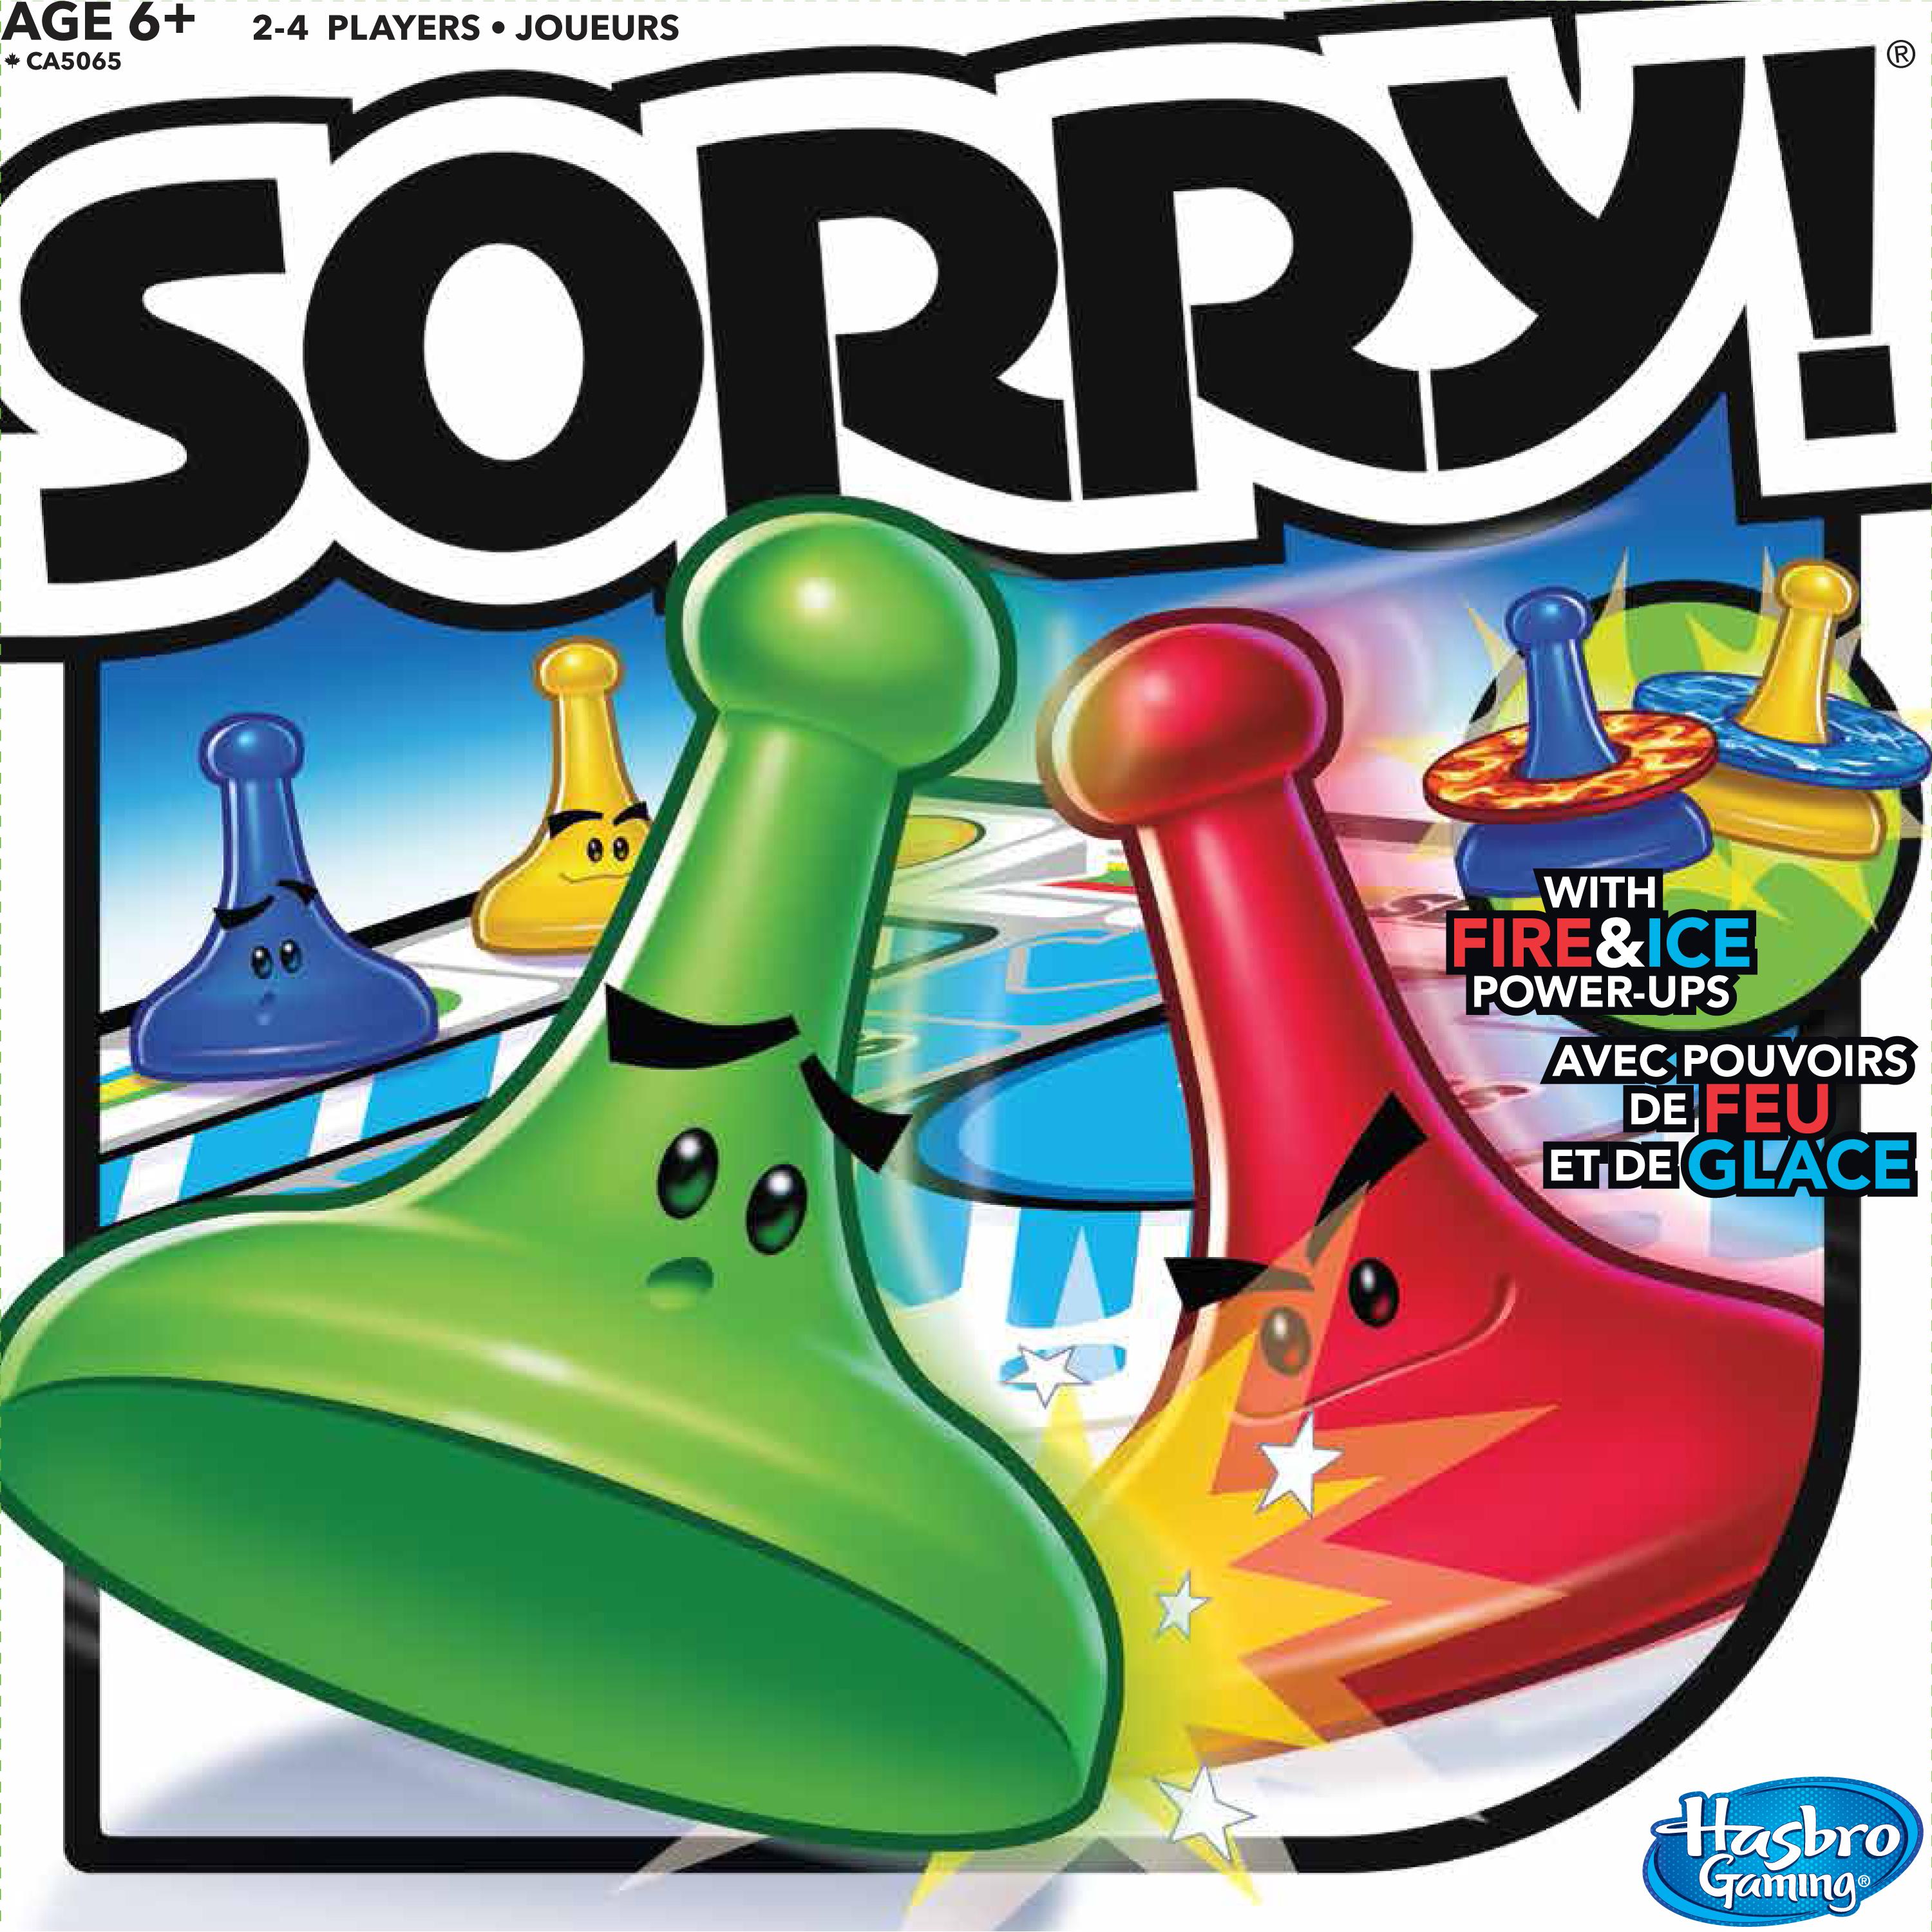  Hasbro Gaming Sorry! Family Board Games for Kids and